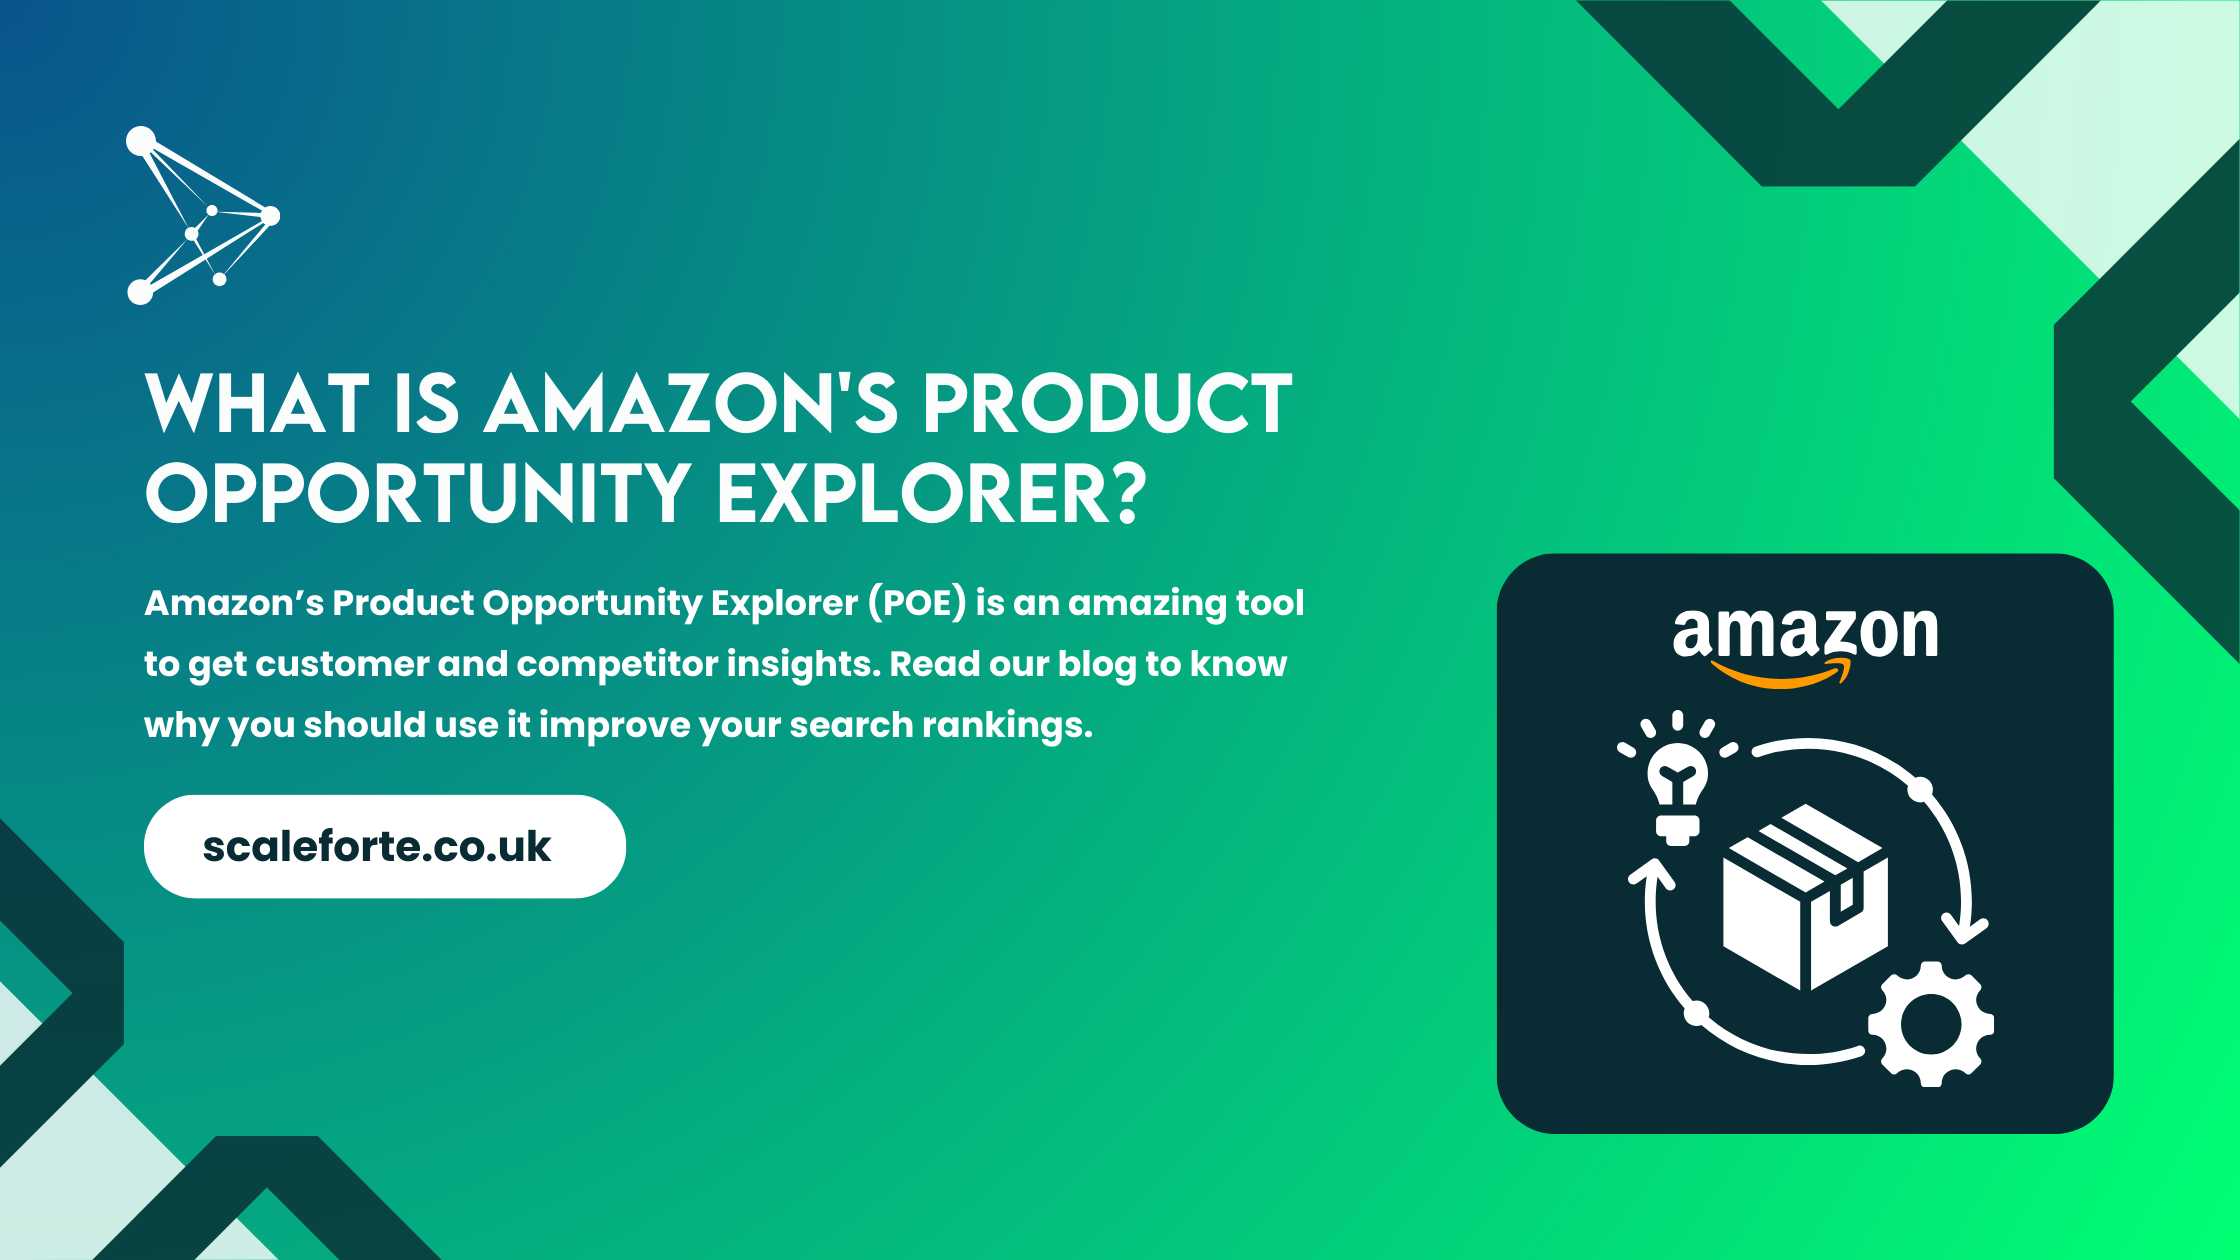 What is Amazon's Product Opportunity Explorer